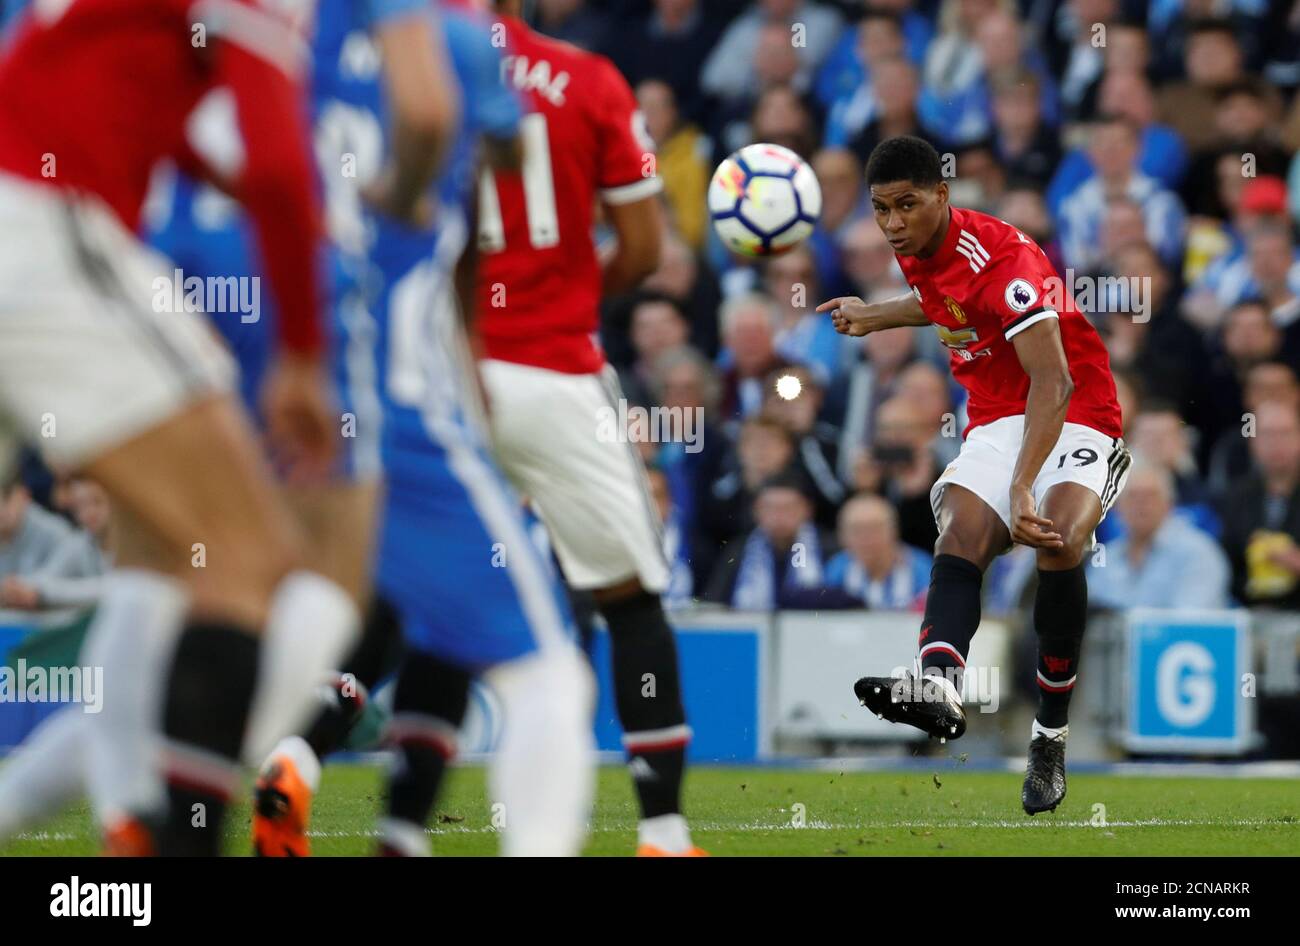 Soccer Football - Premier League - Brighton & Hove Albion v Manchester United - The American Express Community Stadium, Brighton, Britain - May 4, 2018   Manchester United's Marcus Rashford takes a free kick from which Marouane Fellaini scores a goal which is later disallowed   Action Images via Reuters/Paul Childs    EDITORIAL USE ONLY. No use with unauthorized audio, video, data, fixture lists, club/league logos or 'live' services. Online in-match use limited to 75 images, no video emulation. No use in betting, games or single club/league/player publications.  Please contact your account rep Stock Photo